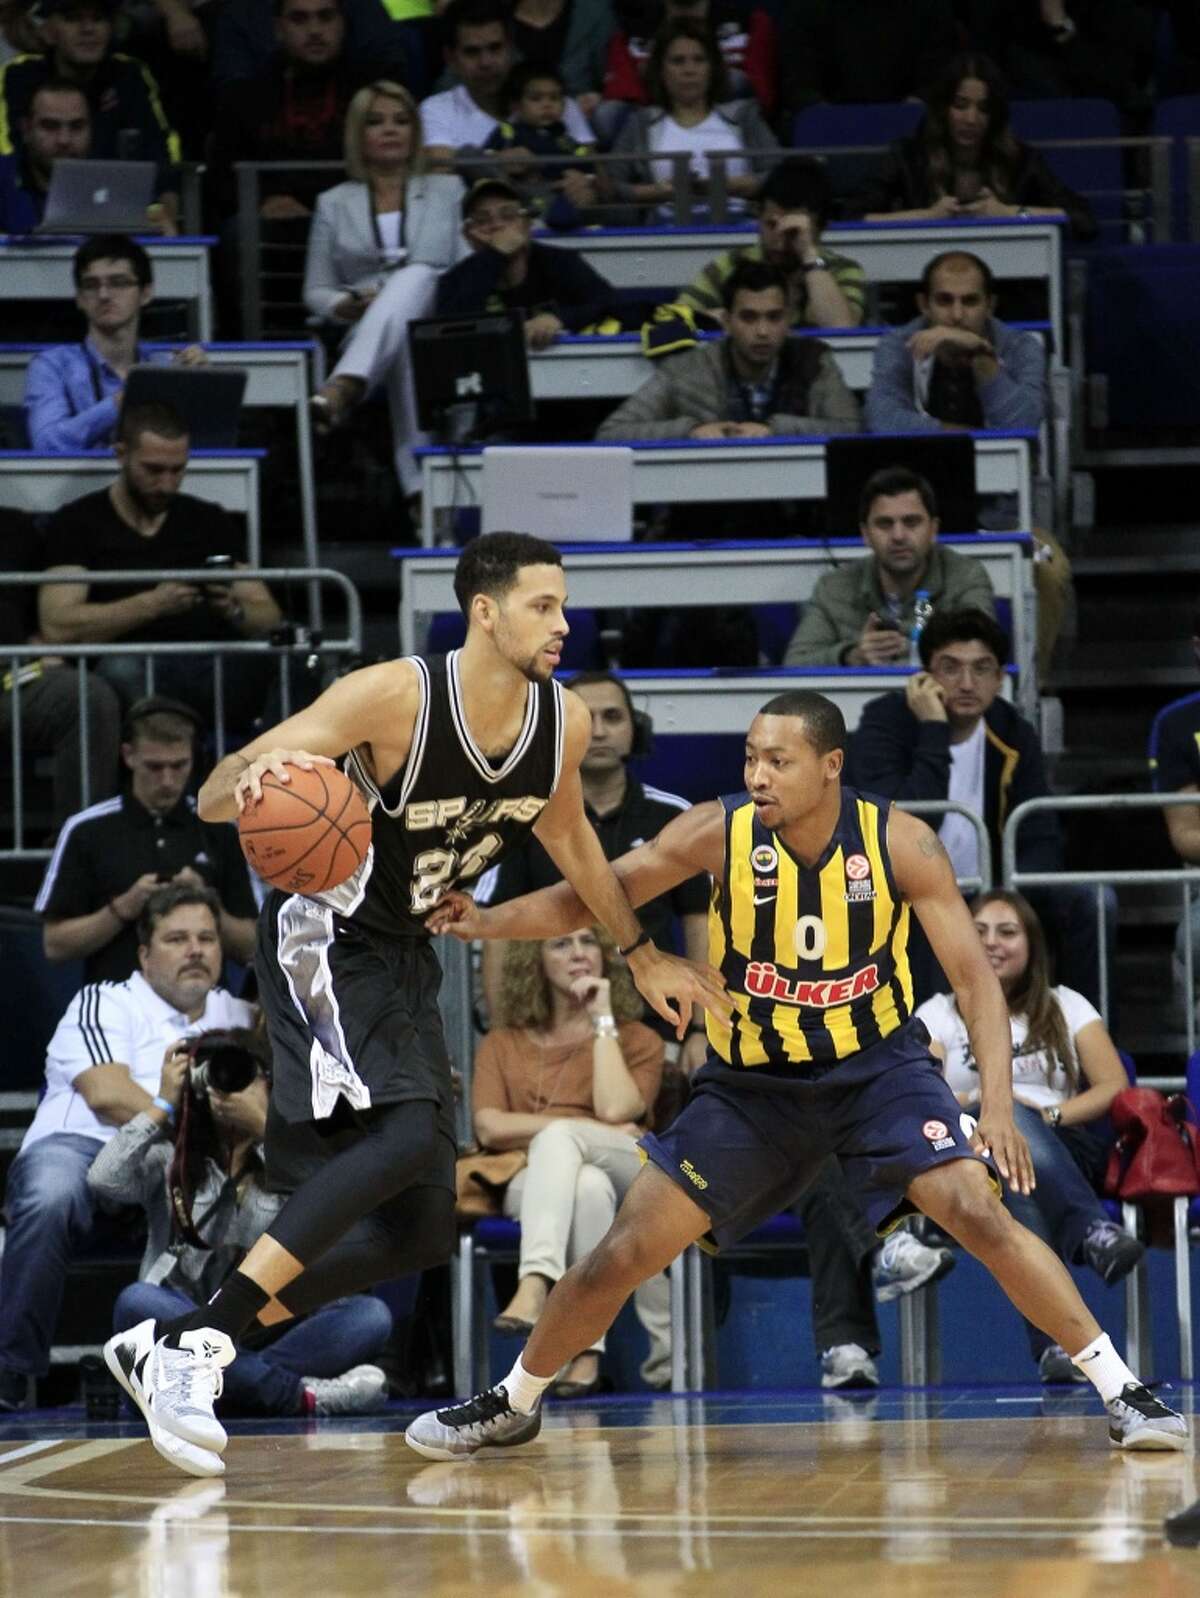 ISTANBUL, TURKEY - OCTOBER 11: Bryce Cotton (26) of San Antonio Spurs in action against Andrew Goudelock (0) of Fenerbahce Ulker during the NBA Global Games match between San Antonio Spurs, reigning NBA winners and Fenerbahce Ulker, Turkish Basketball League's defending champions at the Ulker Sports Arena in Istanbul, Turkey on October 11, 2014. (Photo by Ahmet Dumanli/Anadolu Agency/Getty Images)